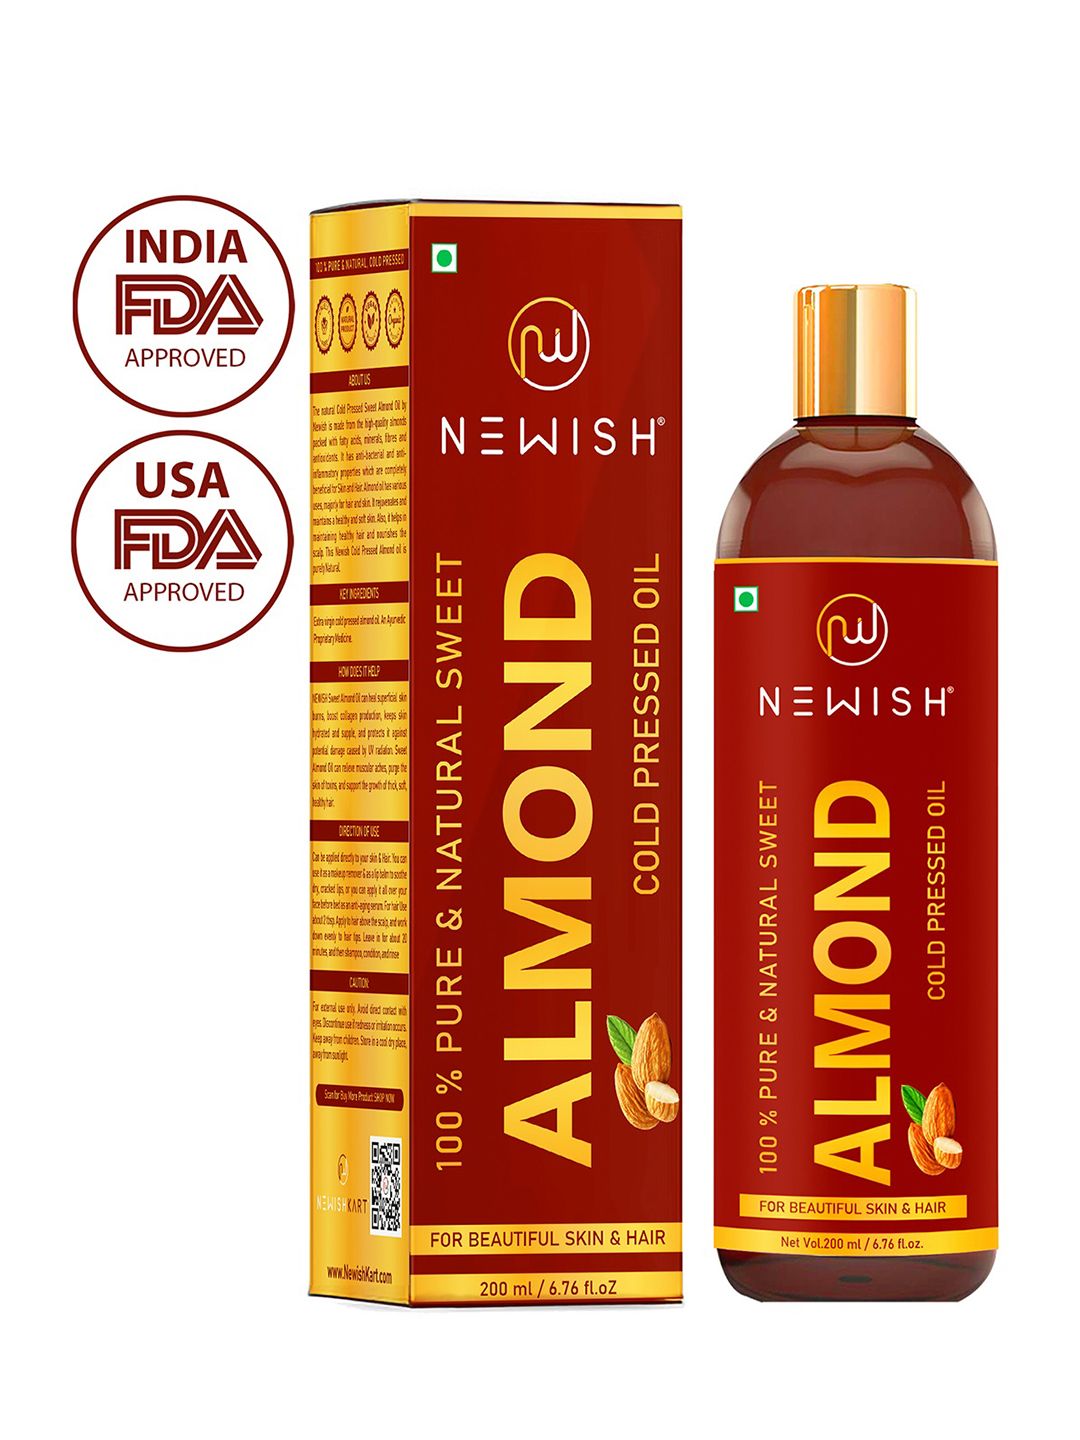 Newish Pure Cold Pressed Sweet Almond Oil for Glowing Skin & Face - 200 ml Price in India